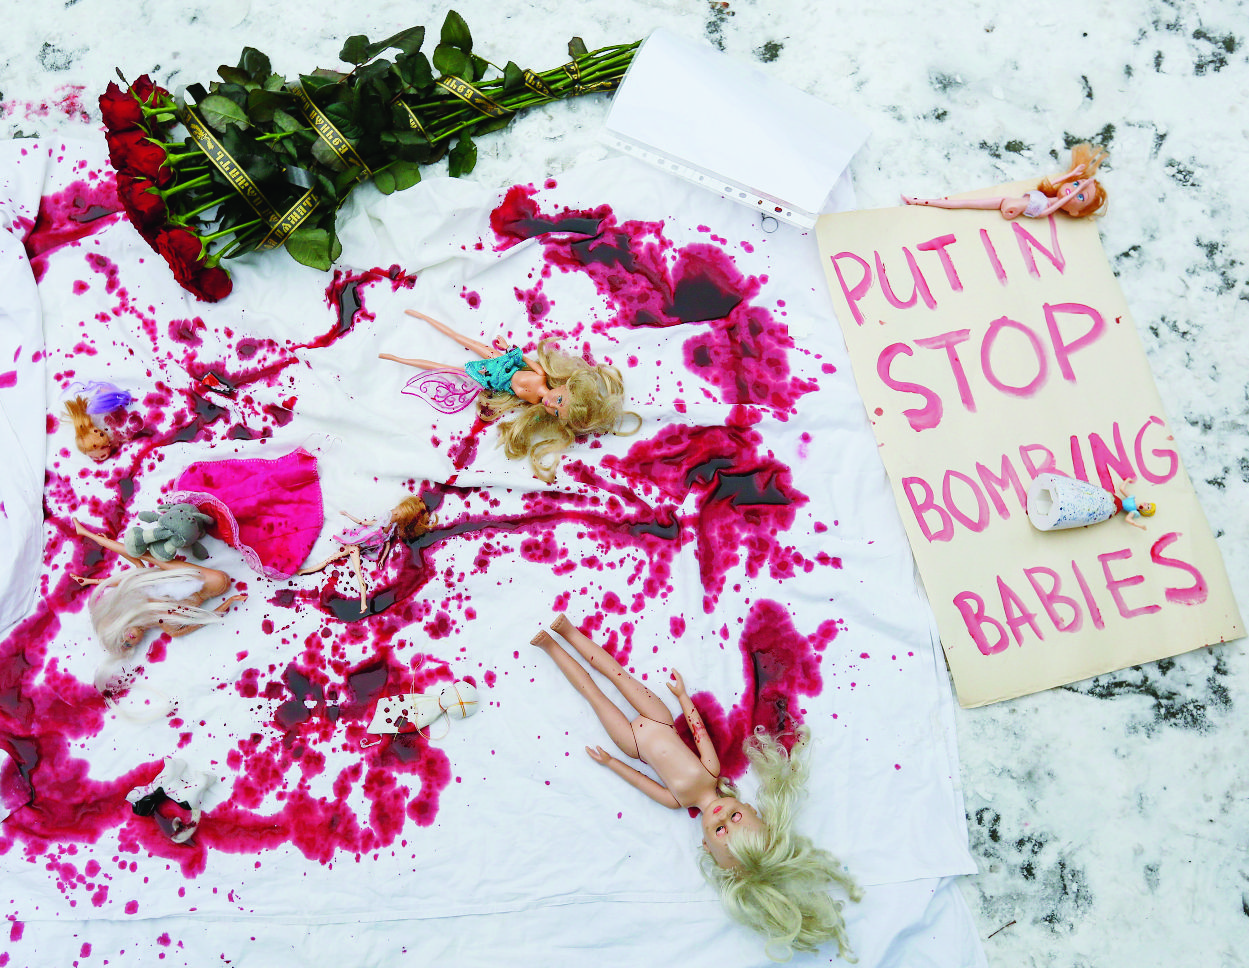 epa05676444 A banner with the text 'Putin stop bombing babies' is placed on the ground next to dolls and flowers during a demonstration of activists calling to stop the bombing of Aleppo in Syria, in front of the Russian embassy in Kiev, Ukraine, 15 December 2016. Activists gathered to show solidarity with trapped citizens of Aleppo in Syria and to demand to stop the bombing of Aleppo in Syria.  EPA/ROMAN PILIPEY UKRAINE PROTEST SYRIA ALEPPO